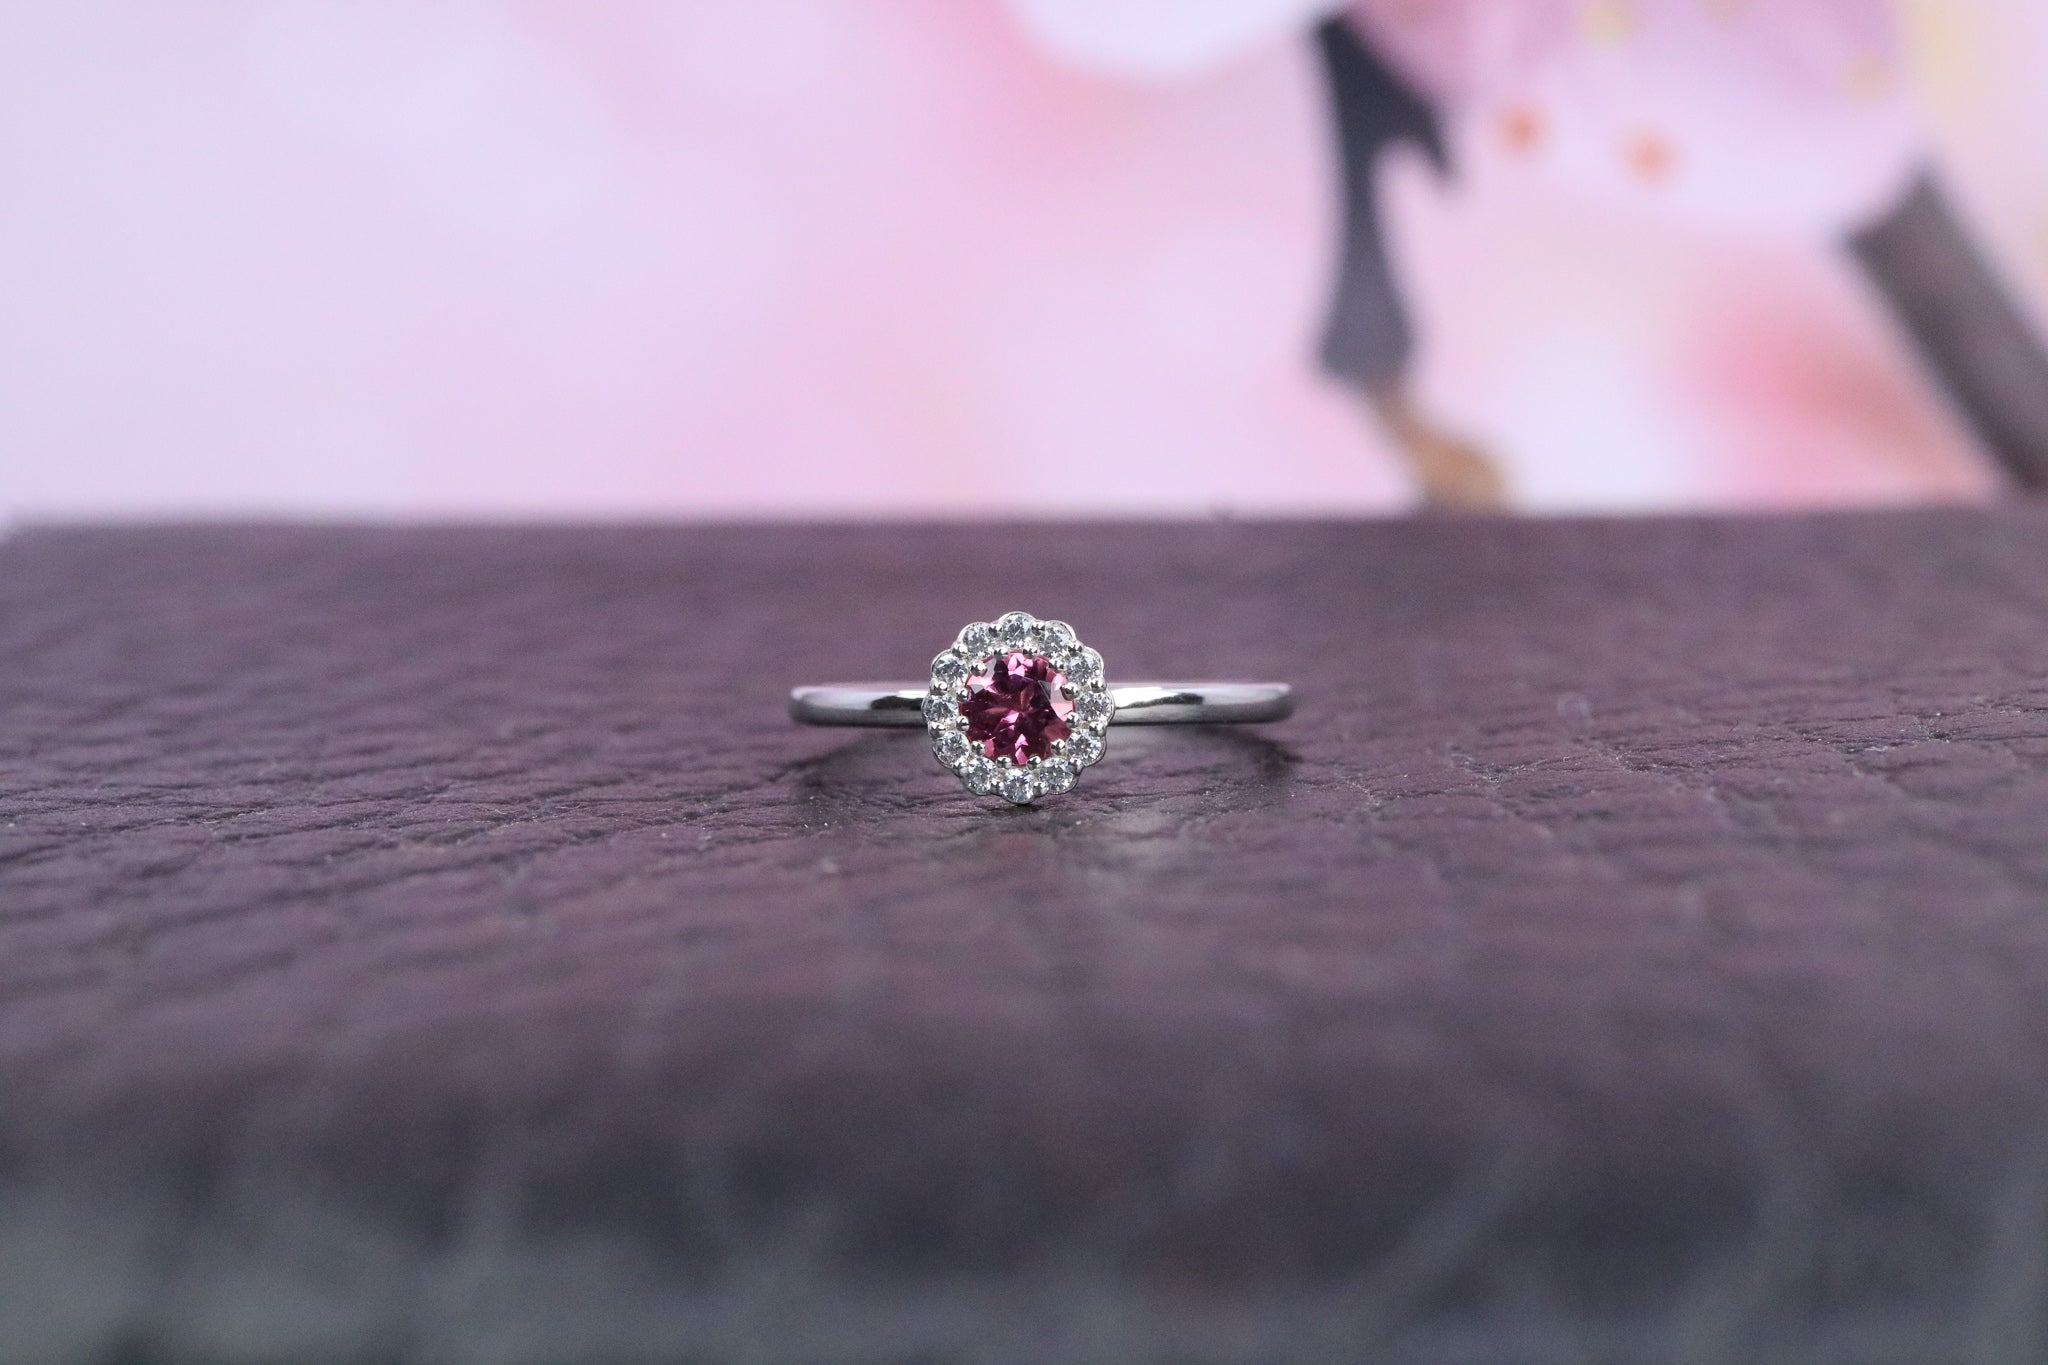 Sterling Silver & October Birthstone Ring - AK1105 - Hallmark Jewellers Formby & The Jewellers Bench Widnes